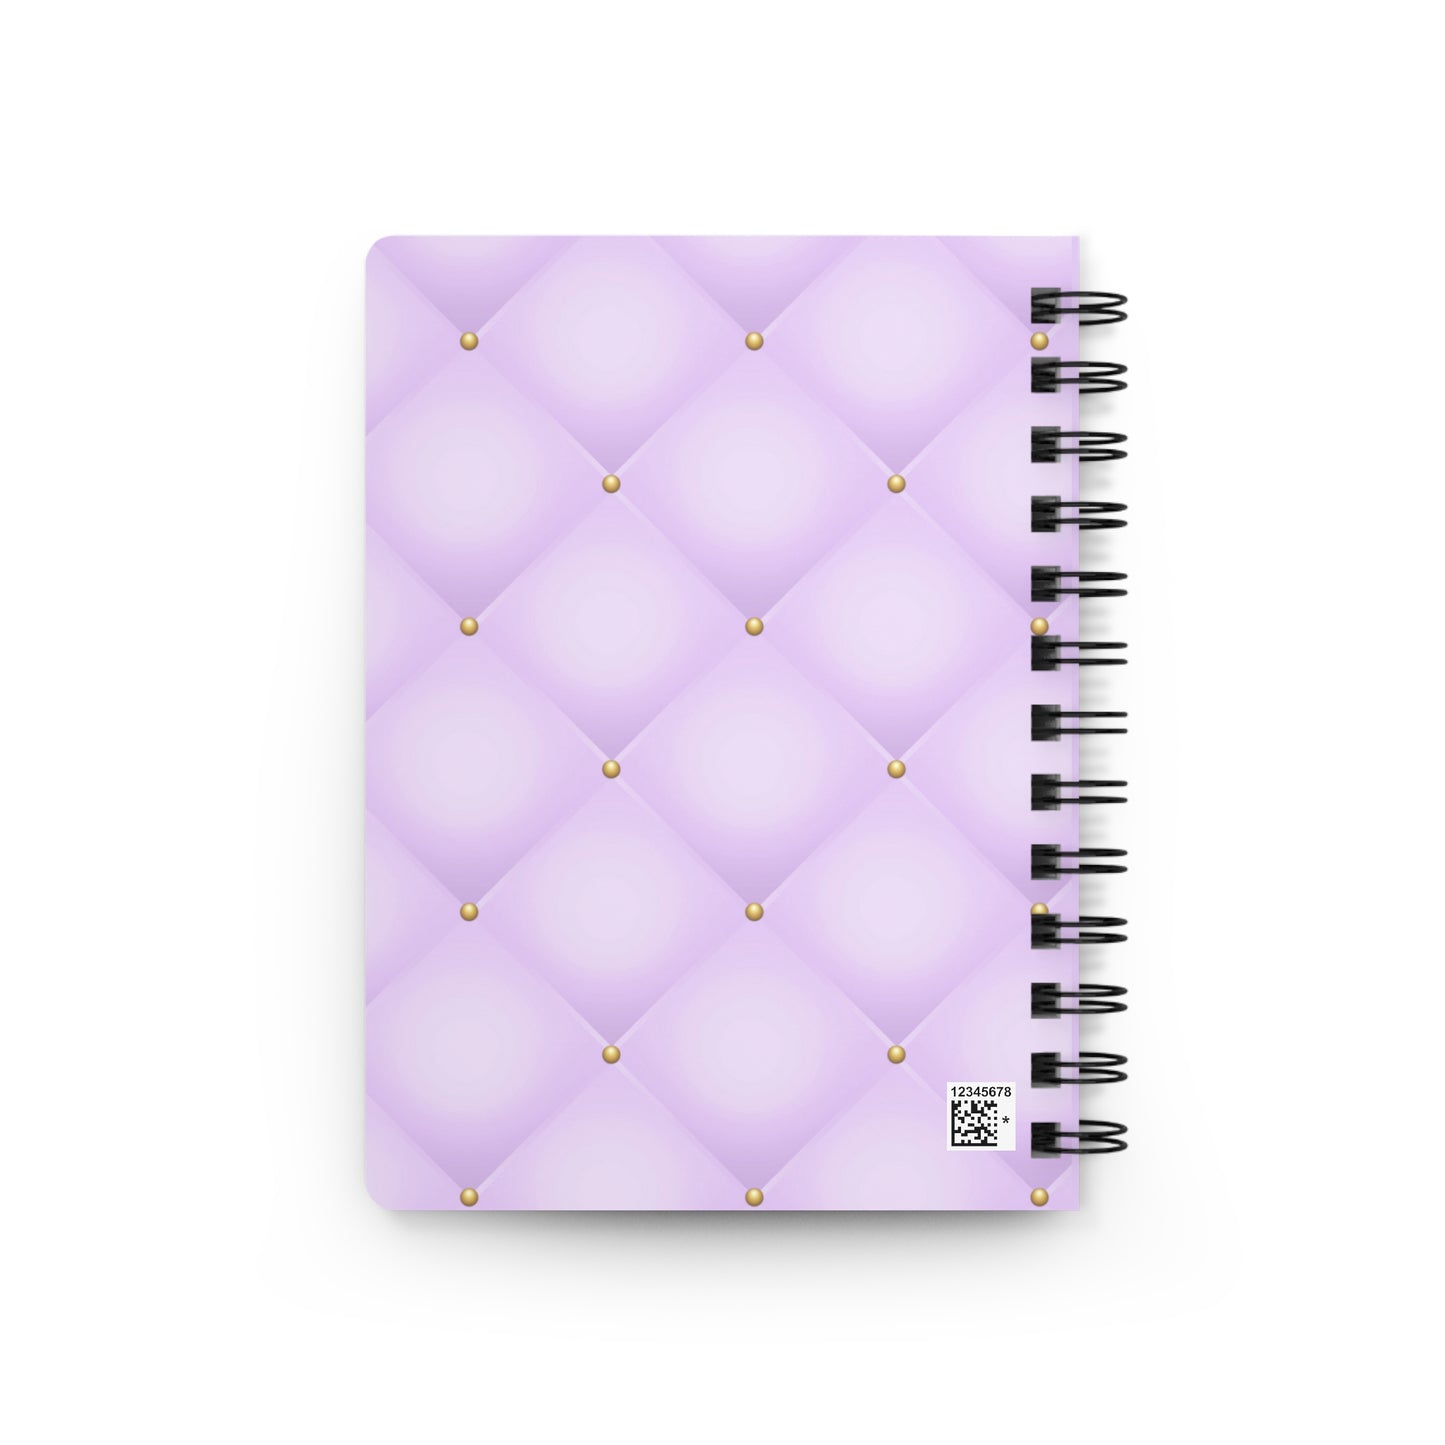 Stop for one minute Tufted Print Light Grayish Violet and Gold Spiral Bound Journal